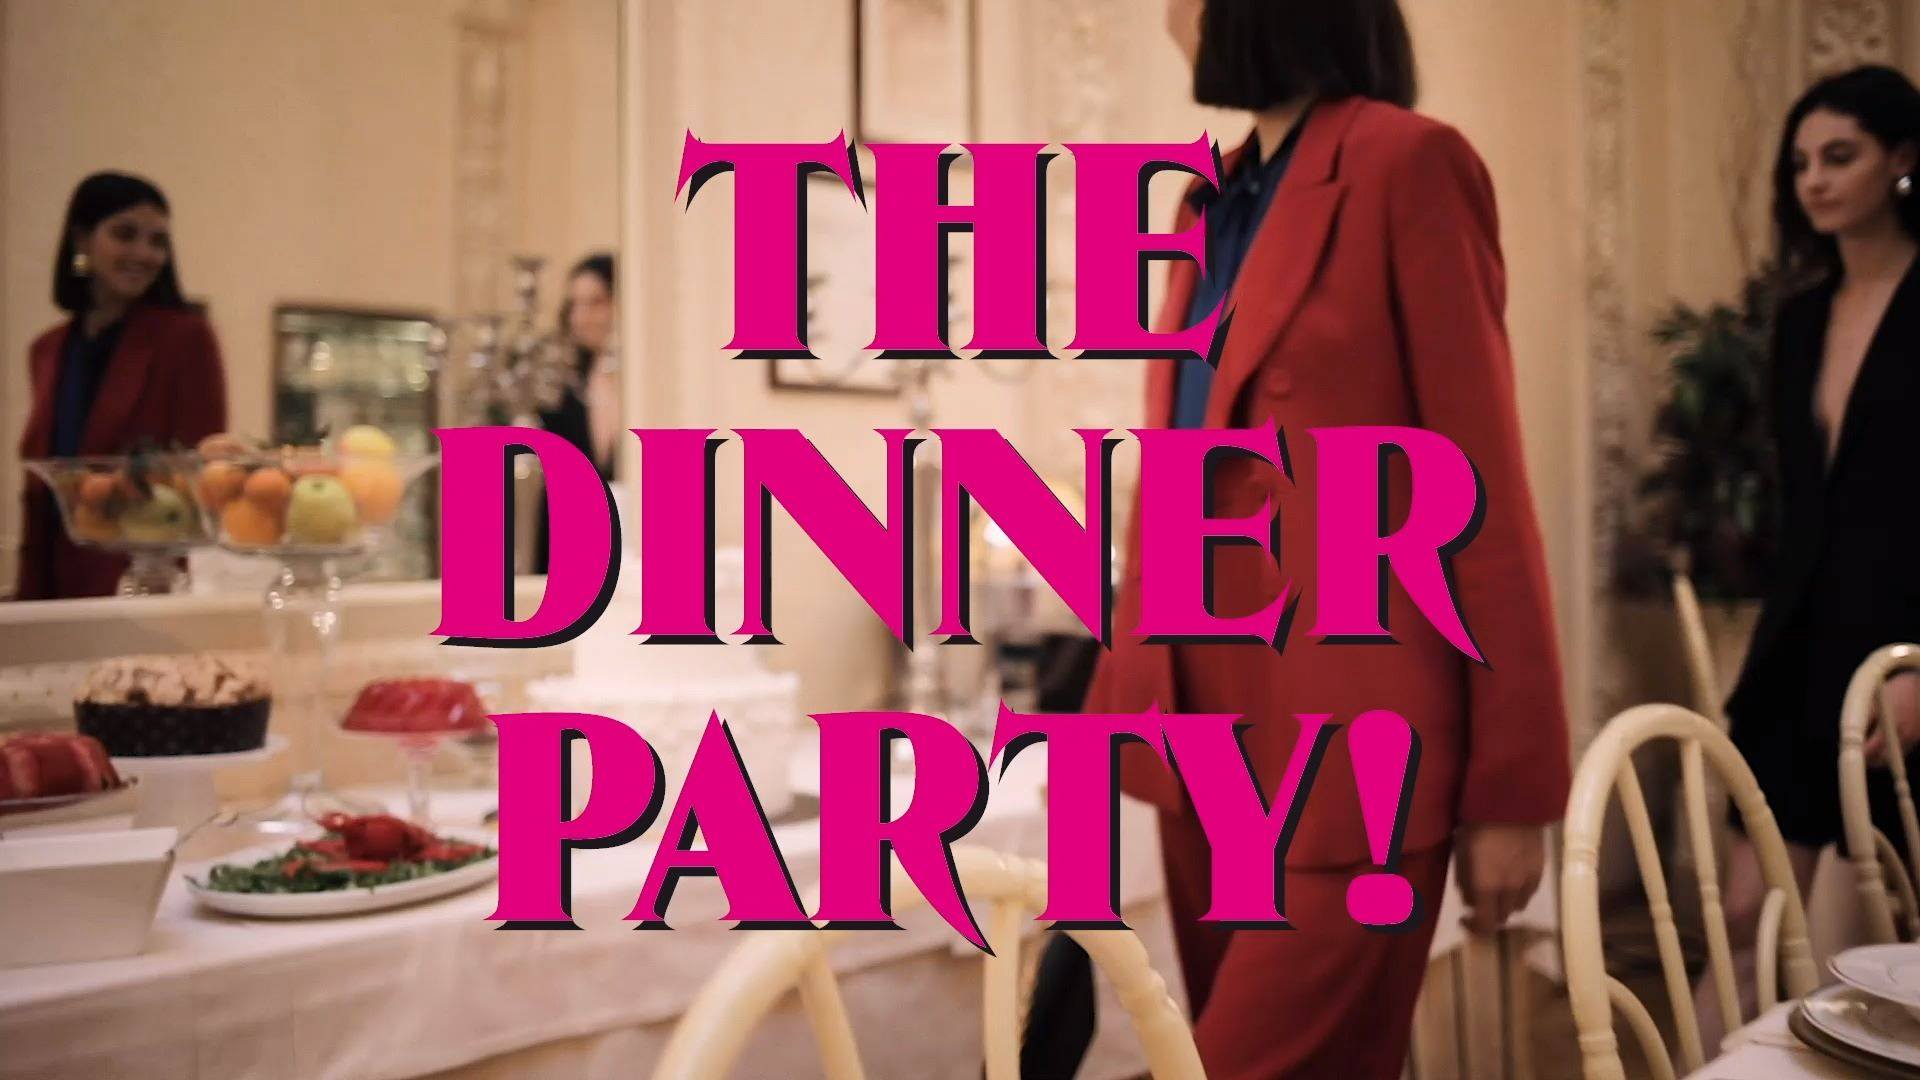 THE DINNER PARTY by #Marella Callin' all the party people!